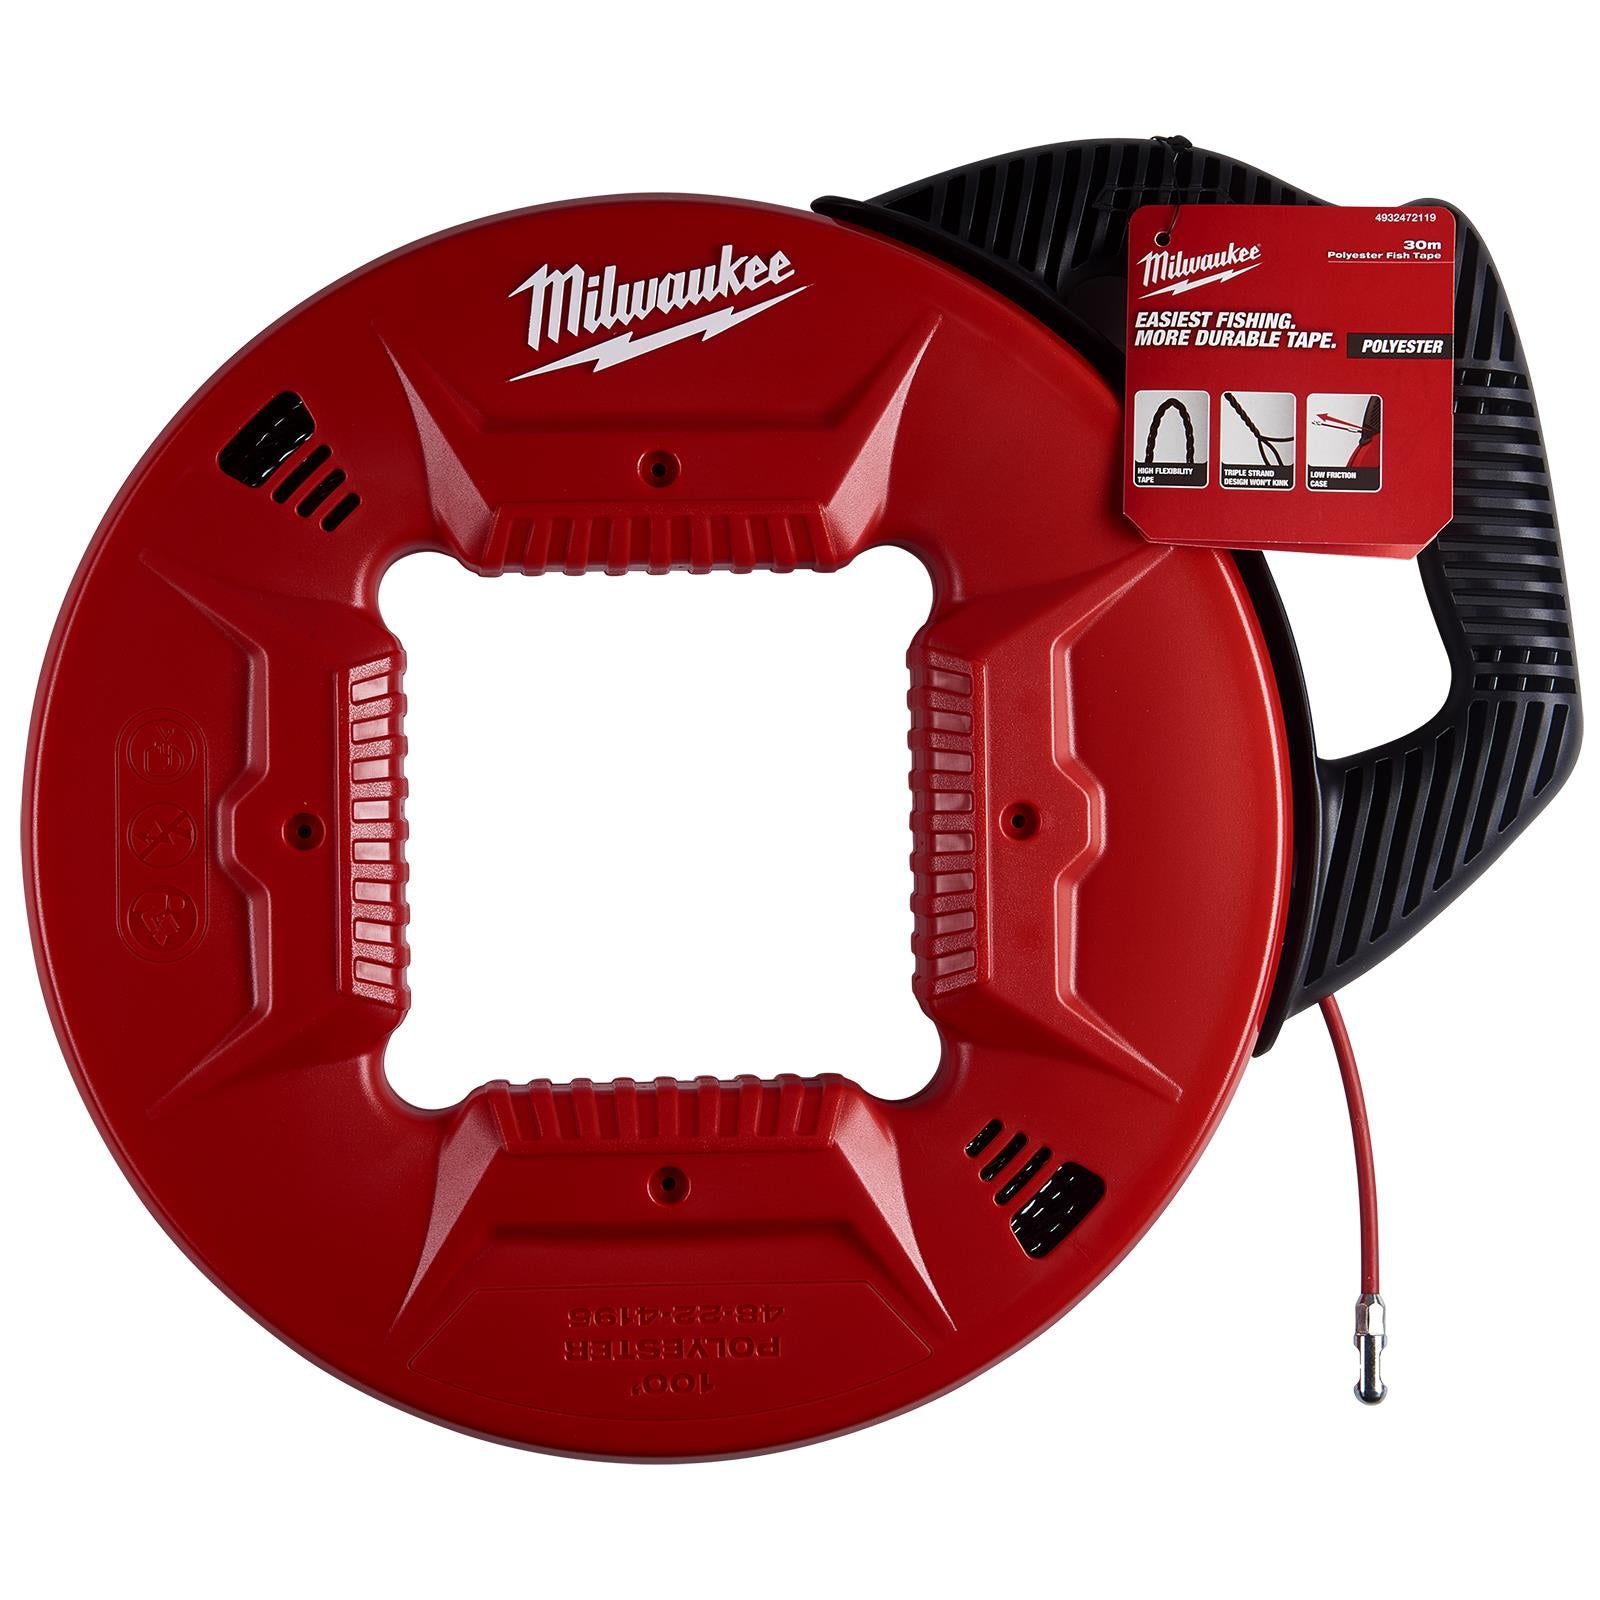 Milwaukee Fish Tape Polyester Non-Conductive 30m Cable Management Draw Wire Pulling Electrician